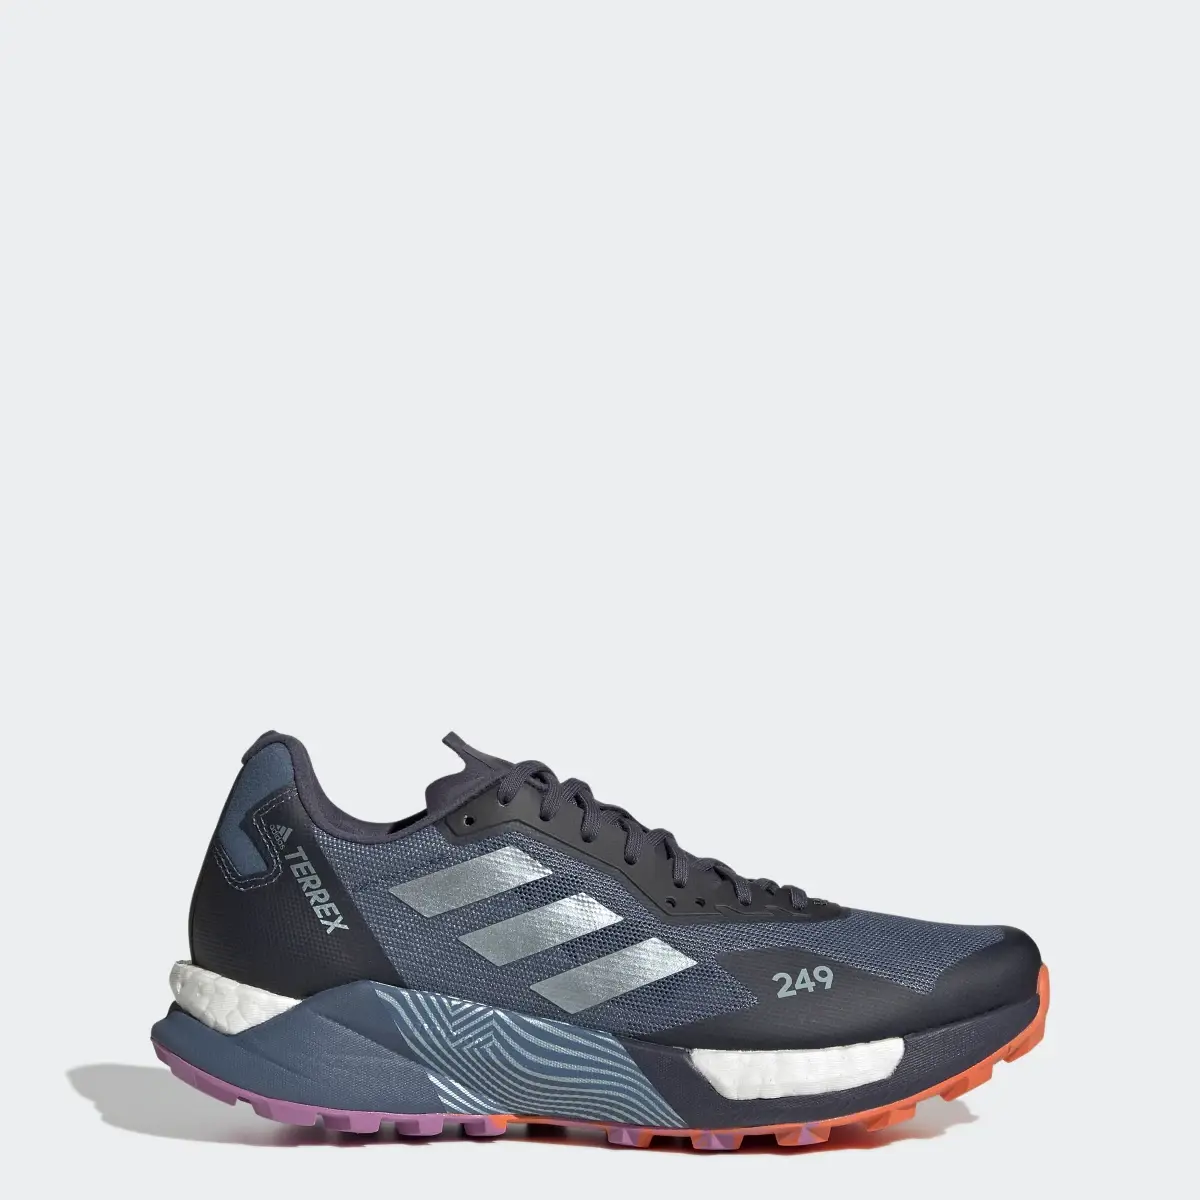 Adidas Terrex Agravic Ultra Trail Running Shoes. 1